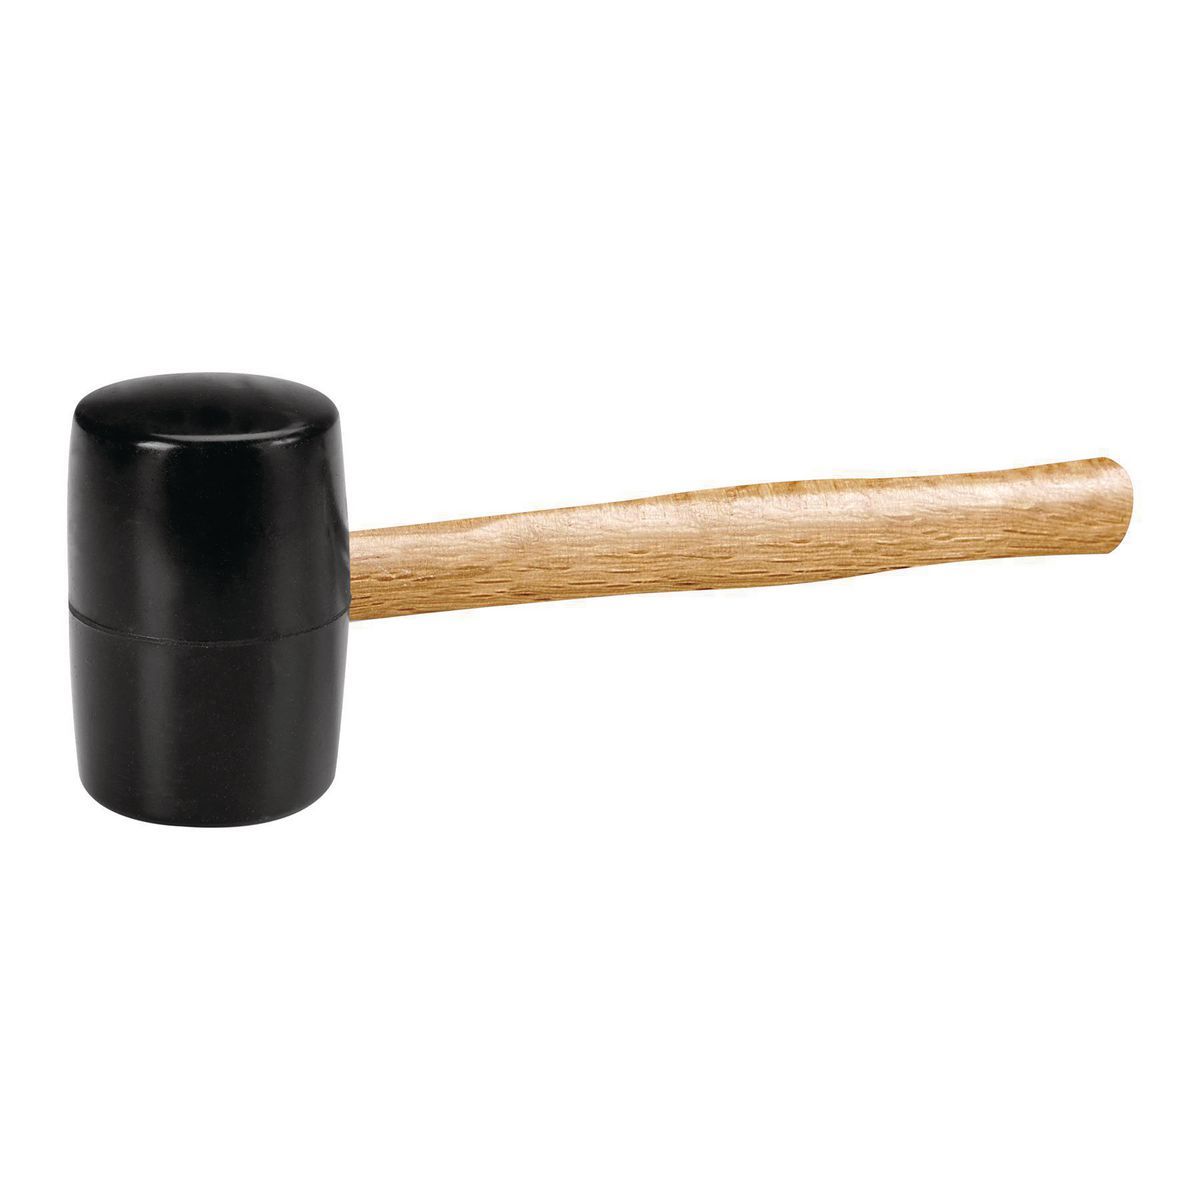 PITTSBURGH 2 lb. Rubber Mallet